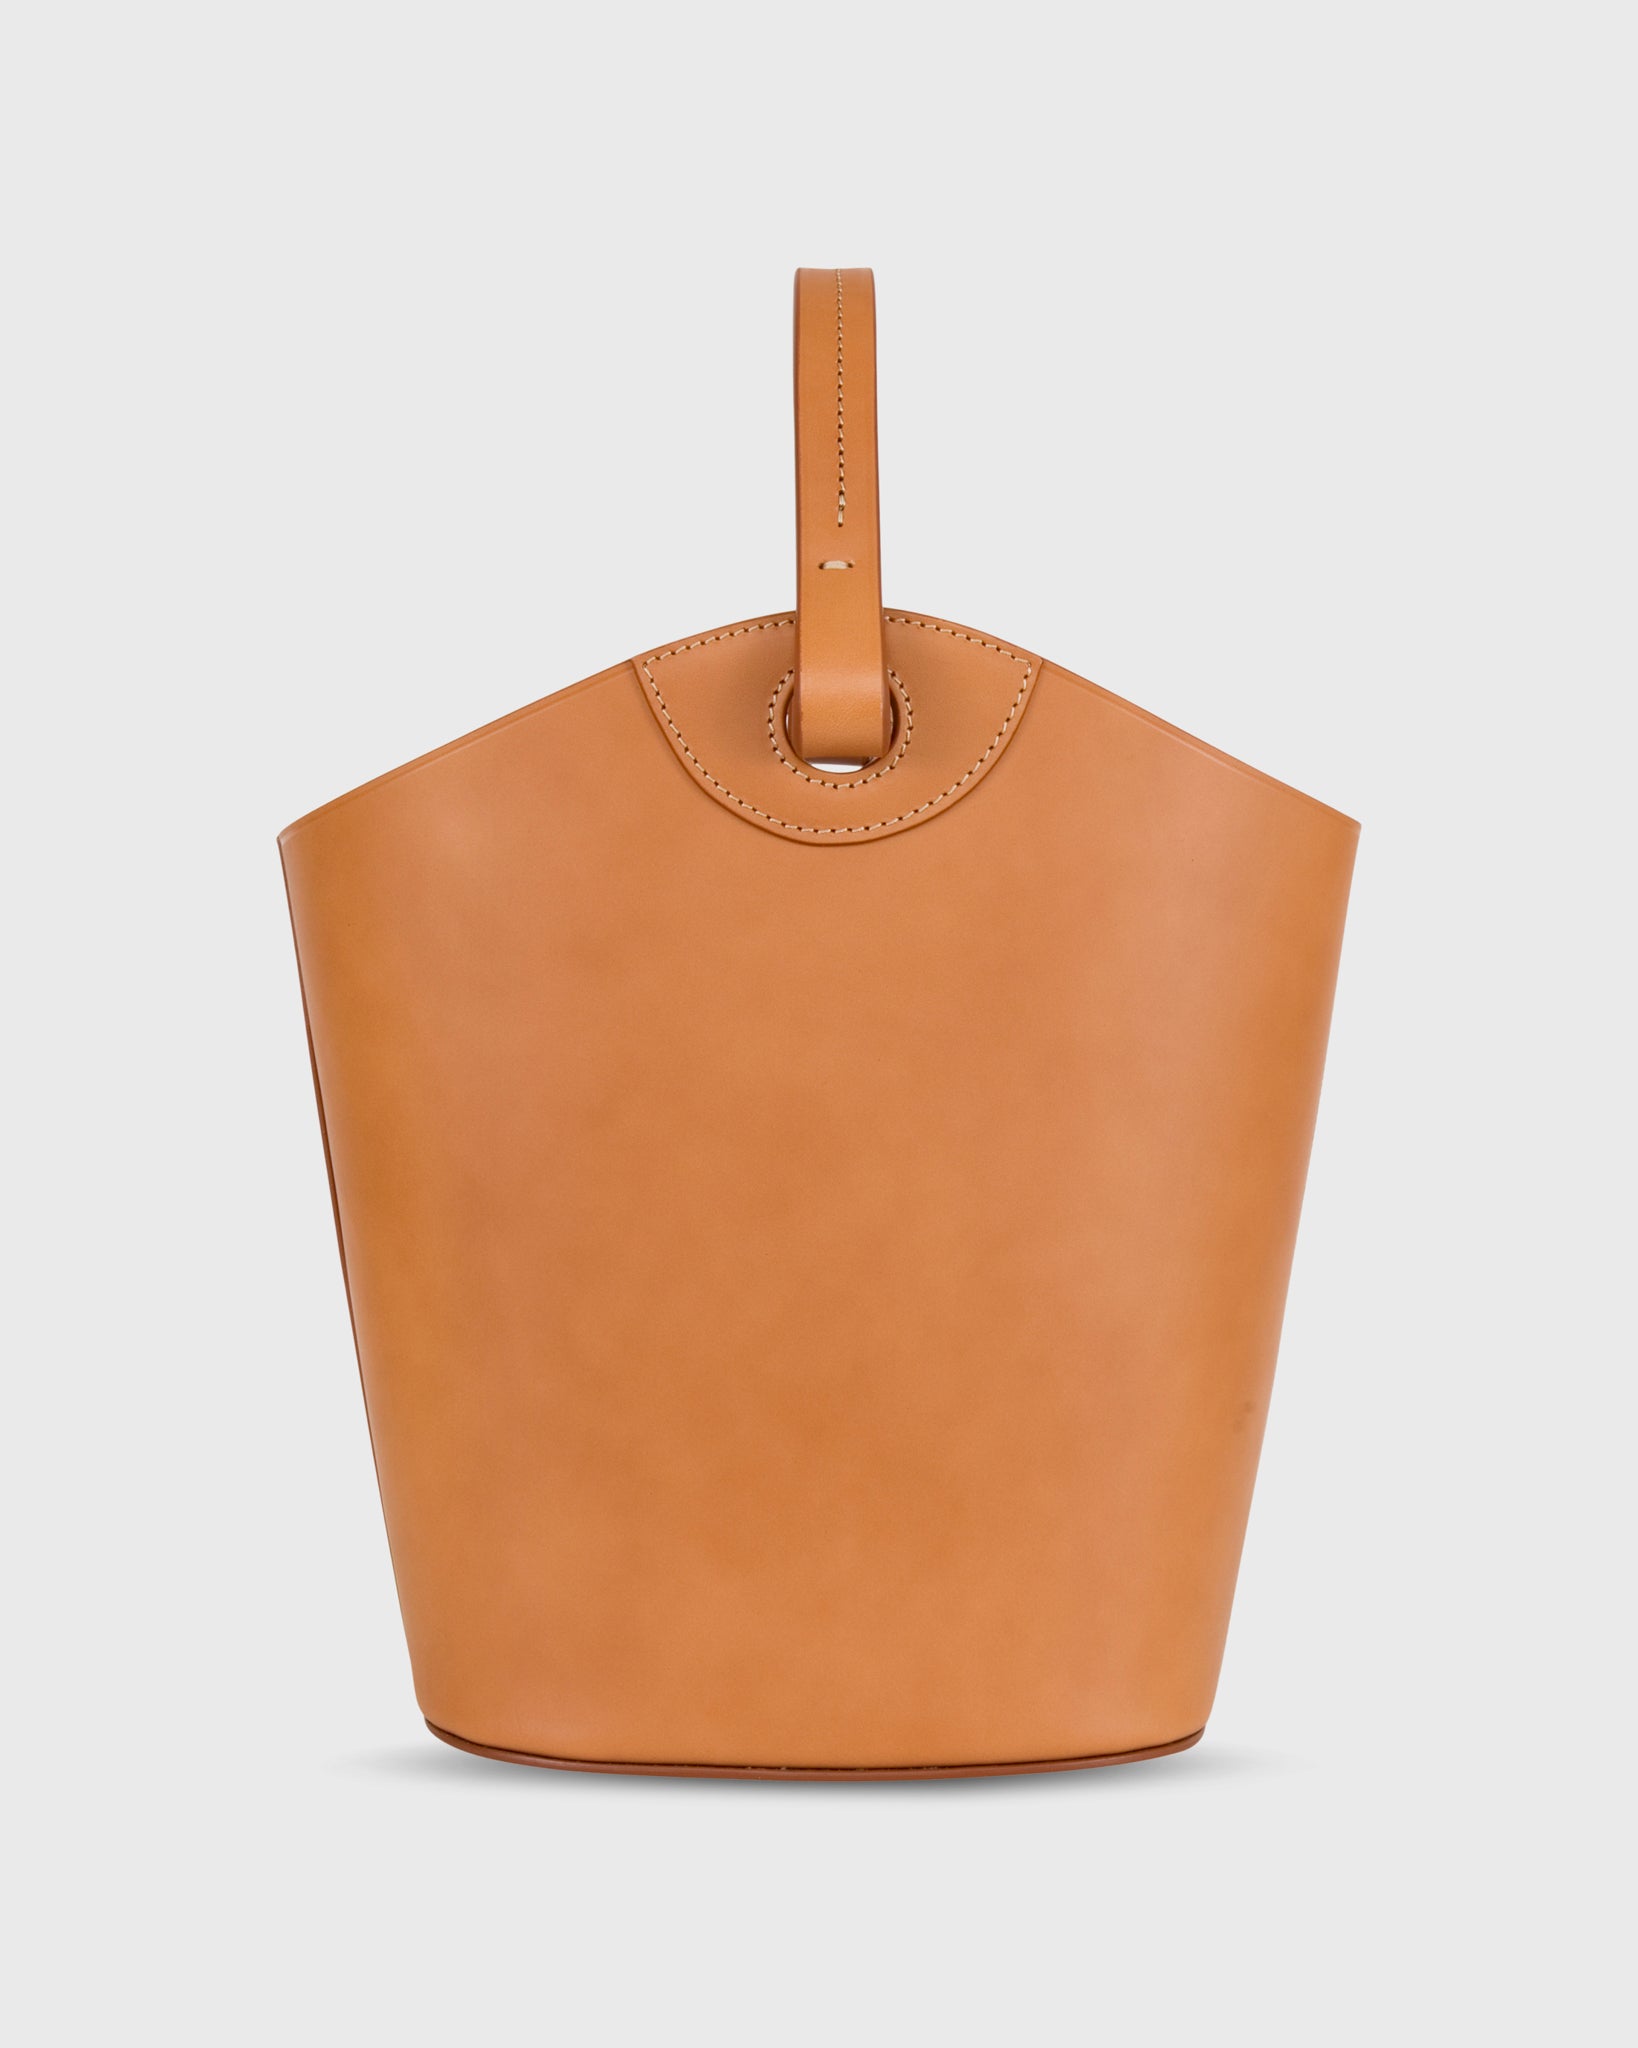 Bucket Tote in Tan Leather